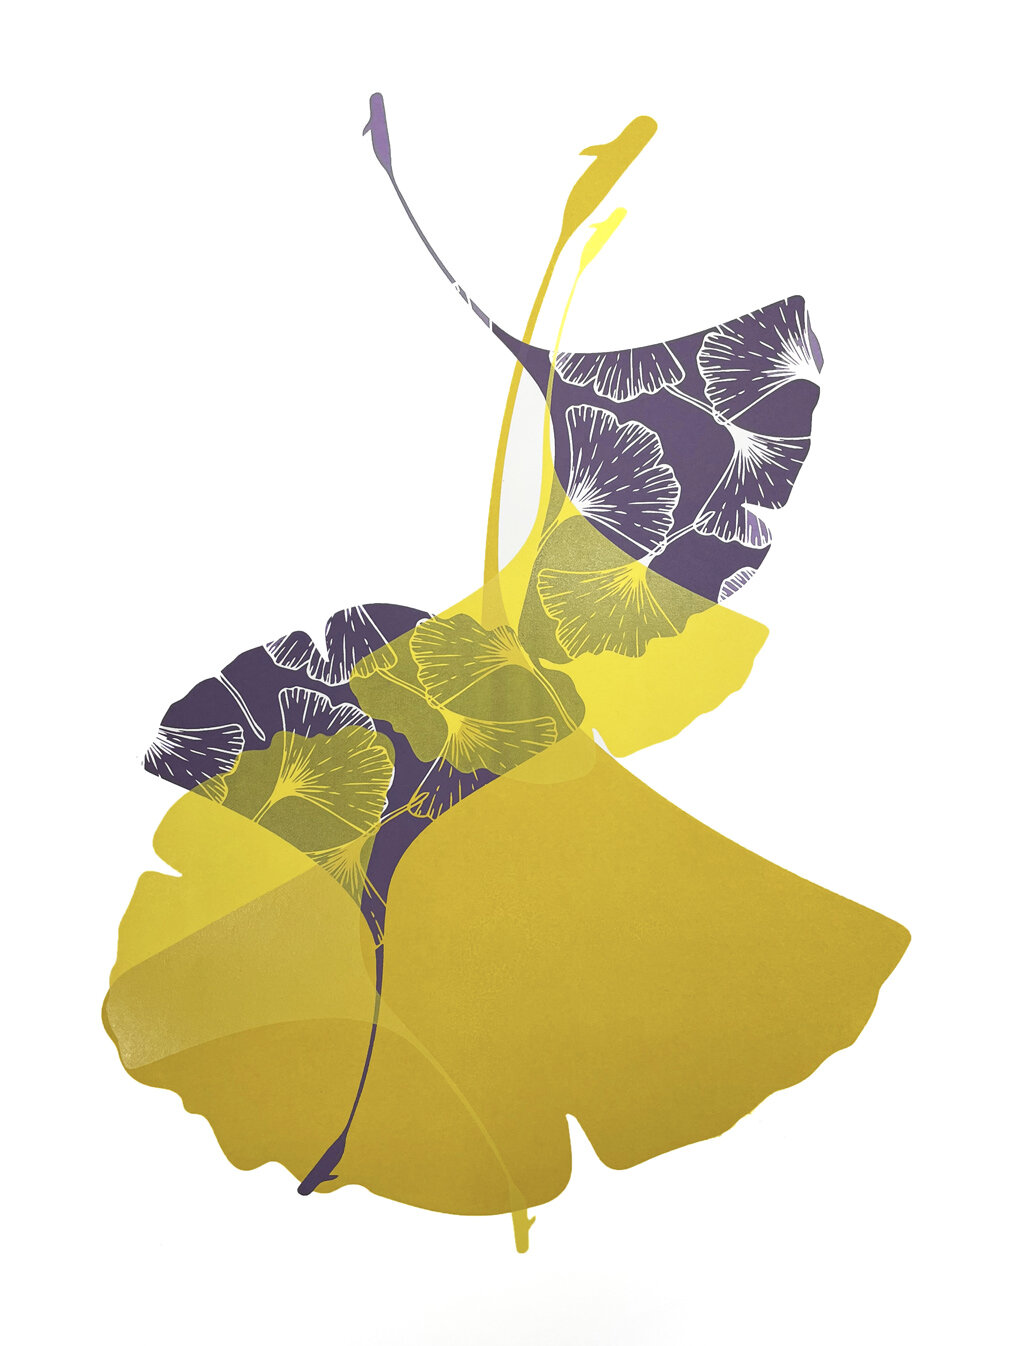   GINKGO GOLD  Silkscreen     - BUY ME -    - CLICK TO VIEW GINKGO COLLECTION -     